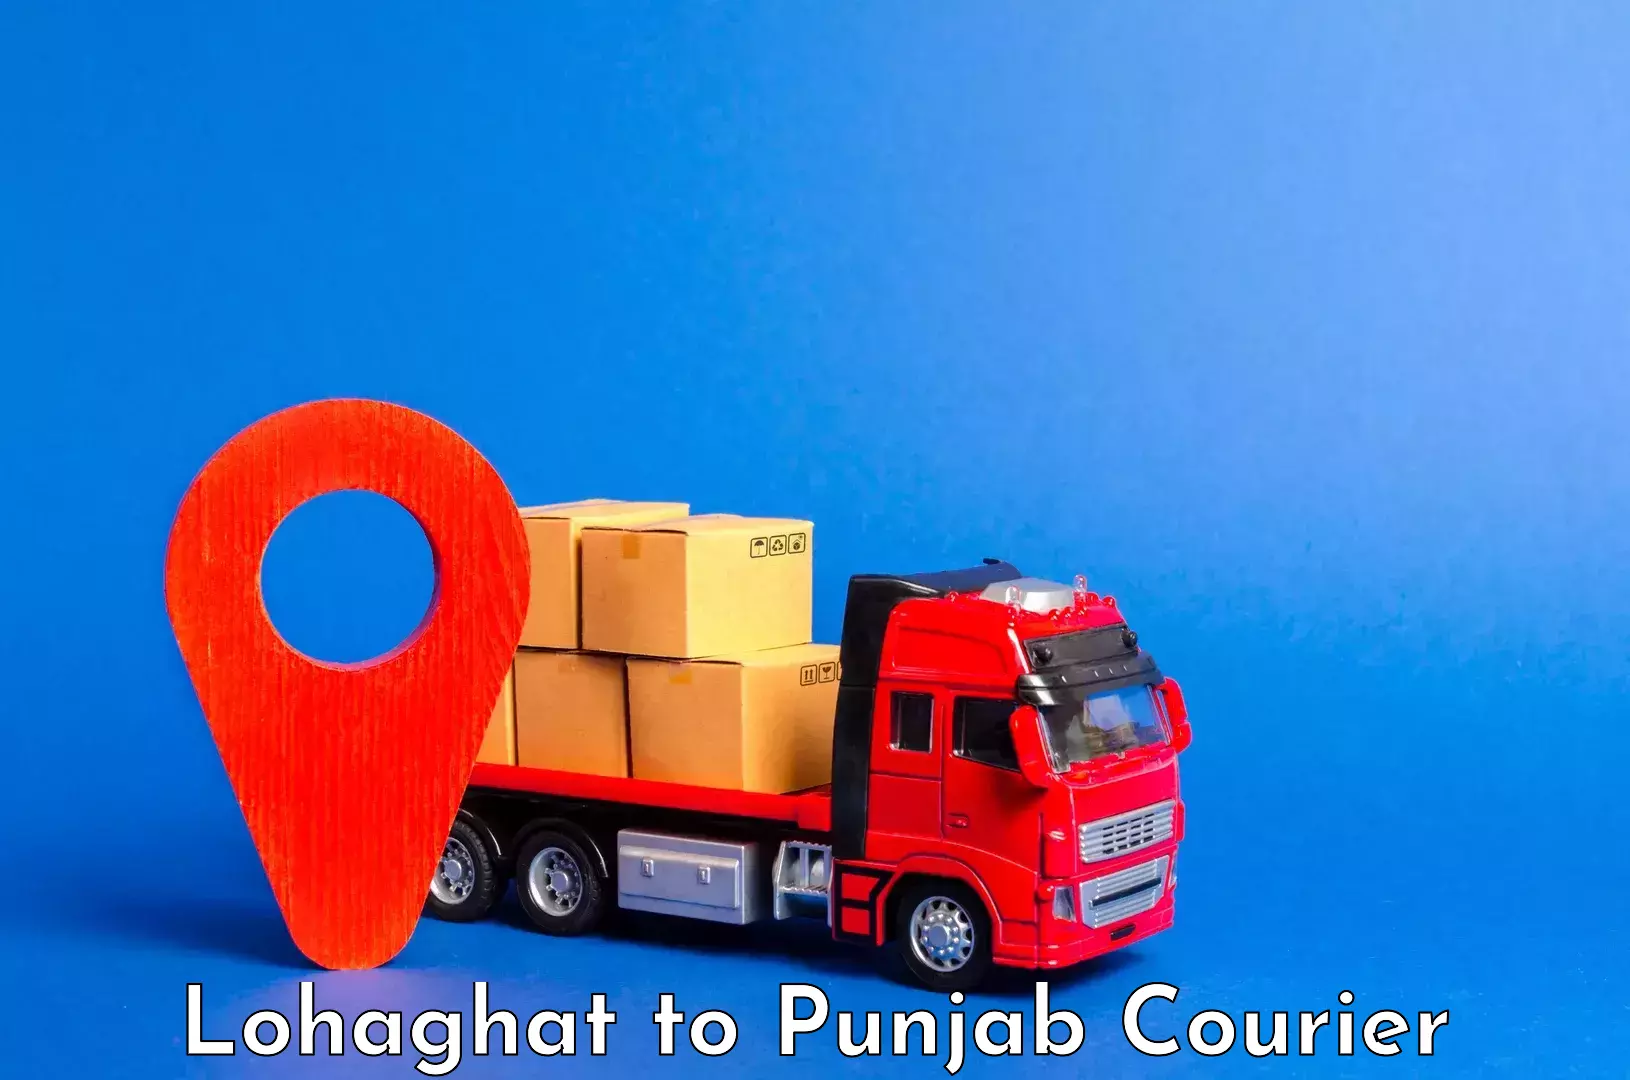 Luggage transport consulting Lohaghat to Khanna